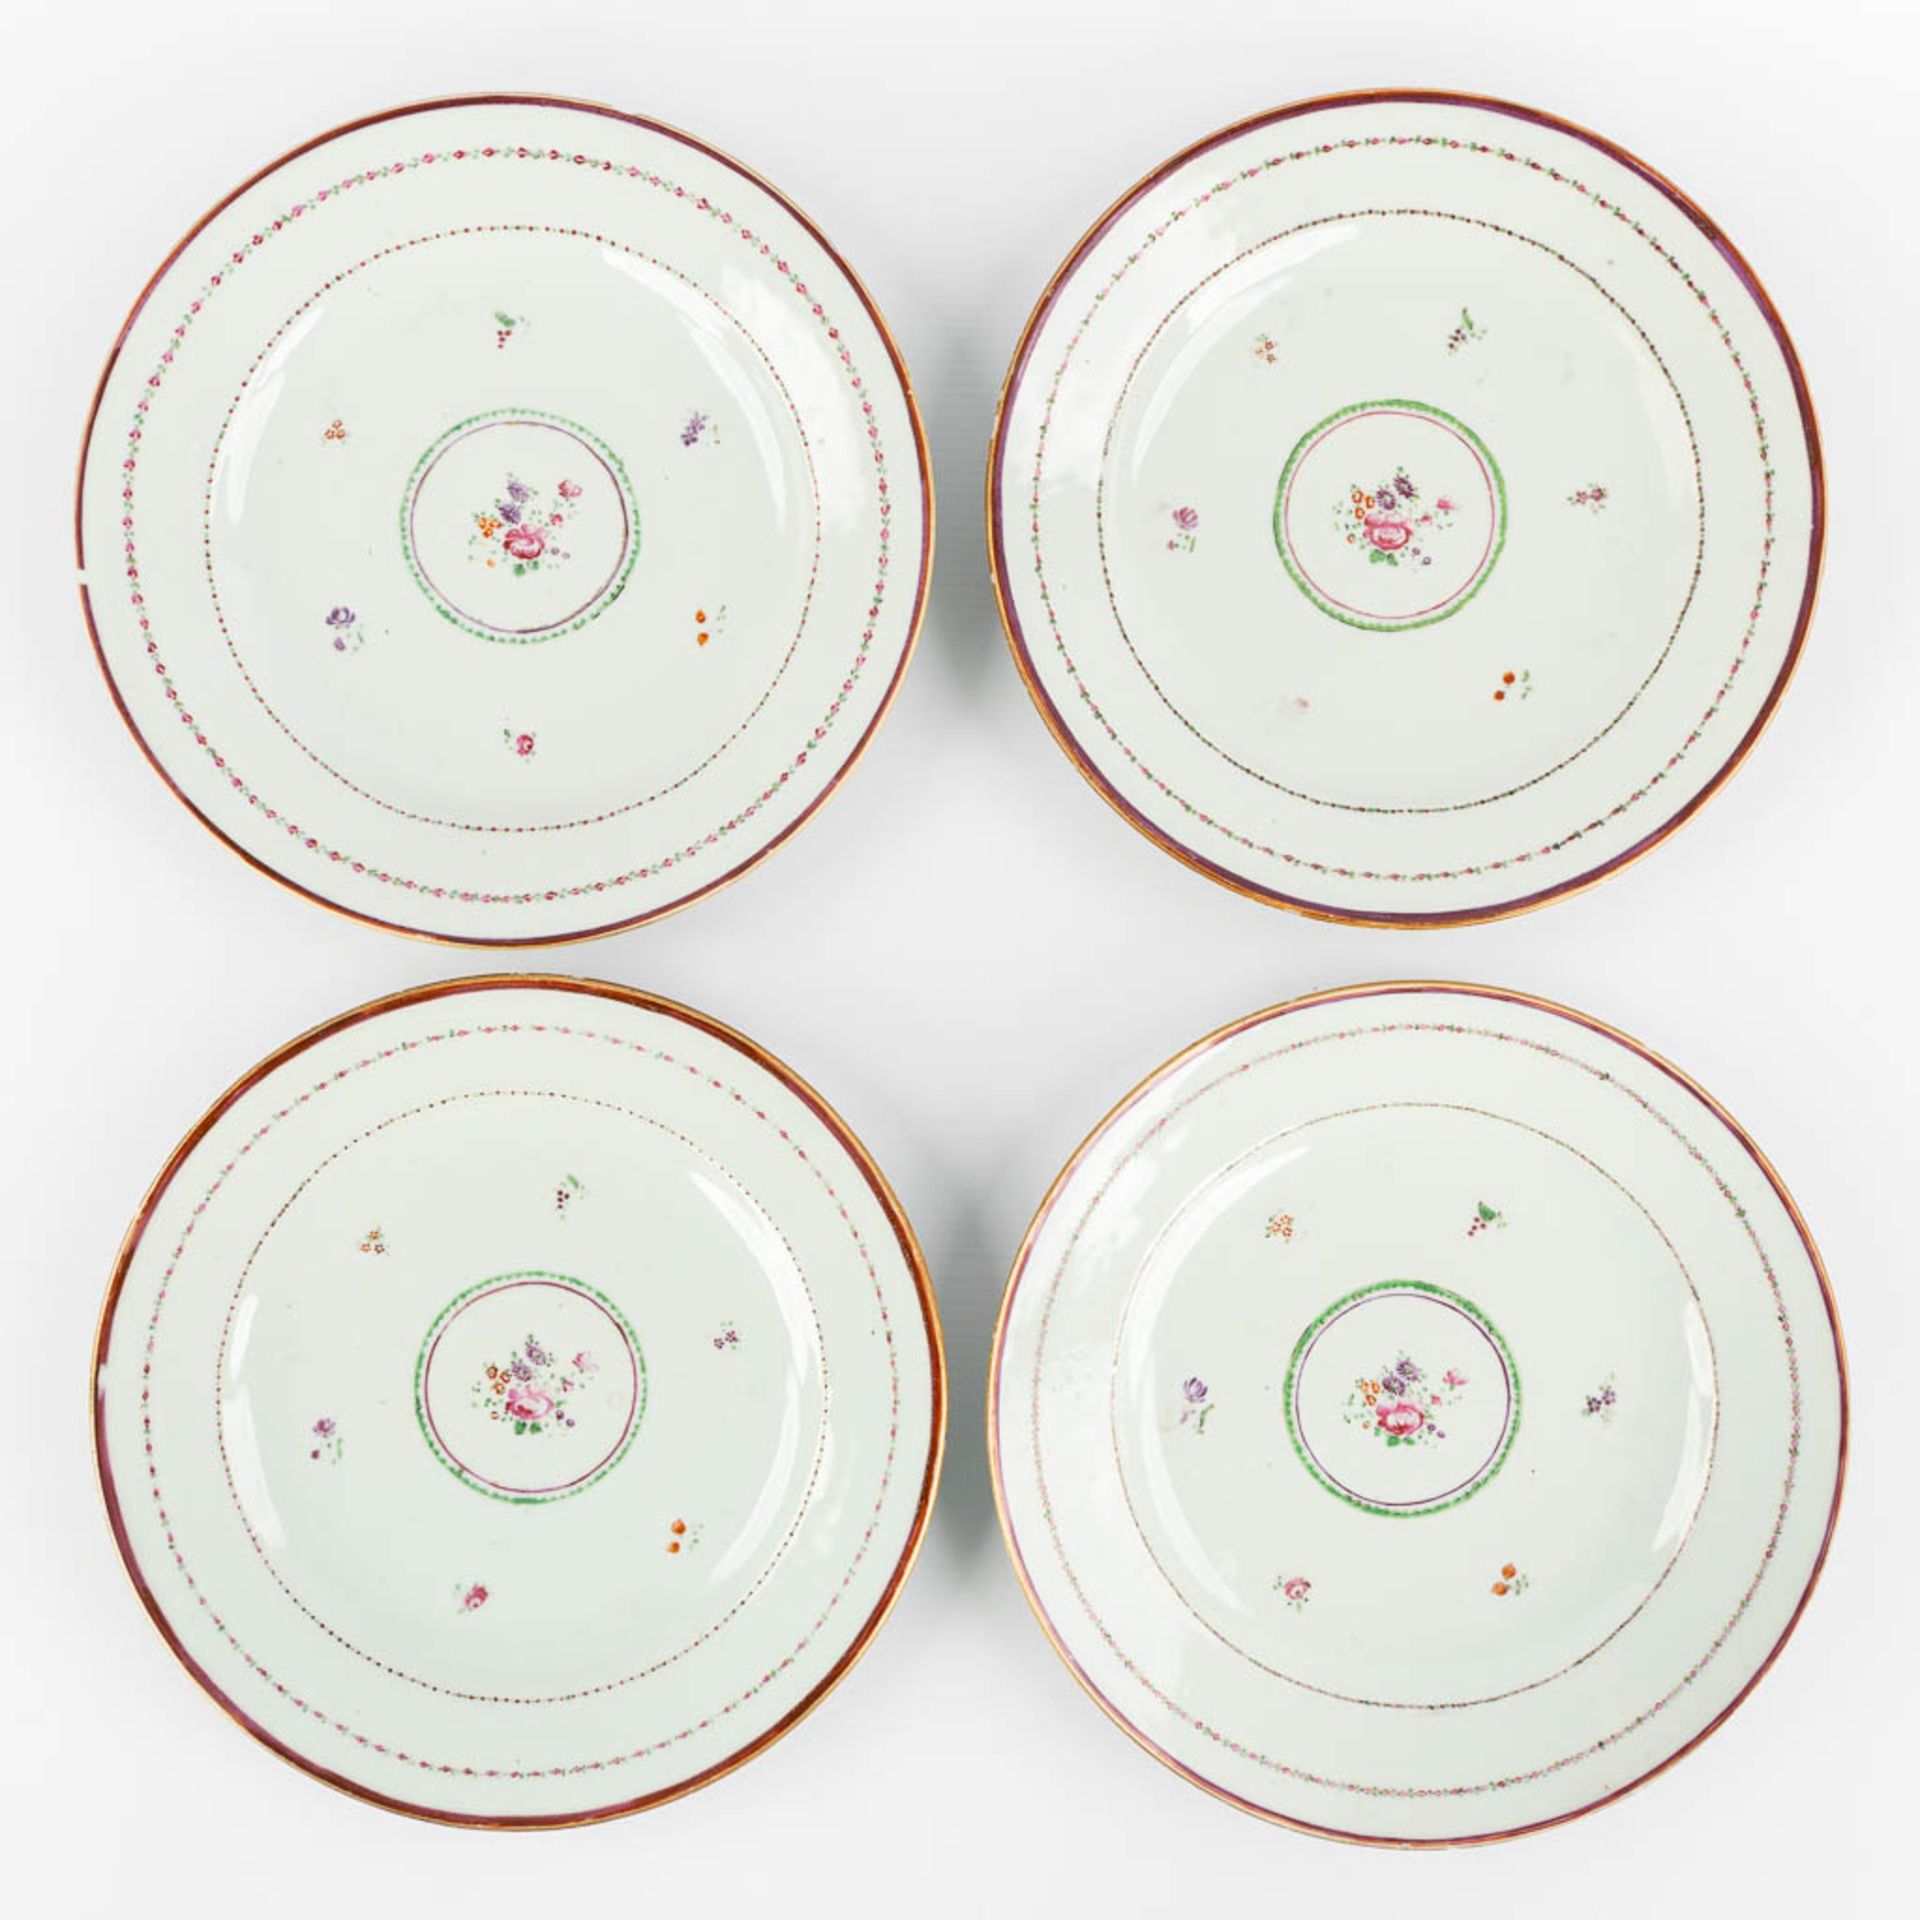 Ten Chinese Famille Rose plates and cups, flower decor. (D:23,5 cm) - Image 3 of 13